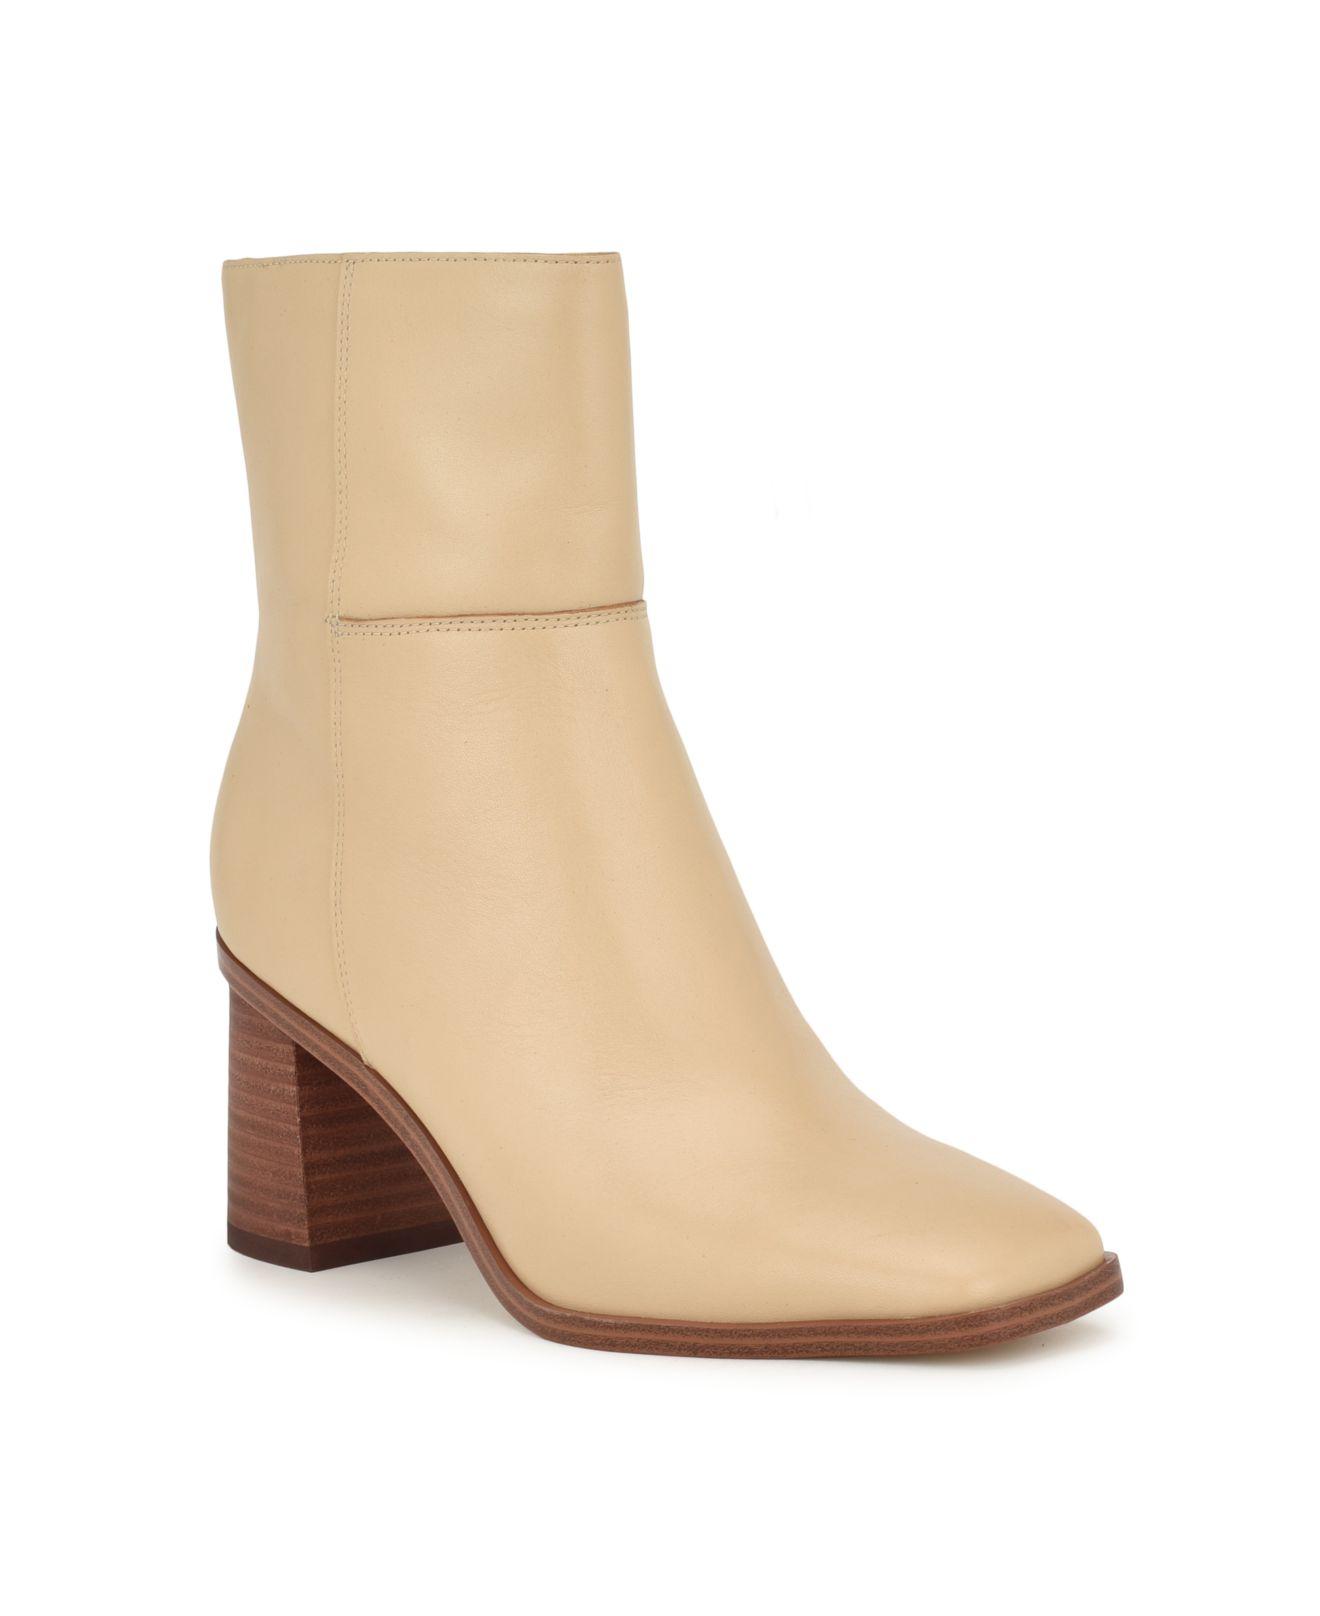 Nine West Dither Square Toe Stacked Heel Dress Booties in Natural | Lyst